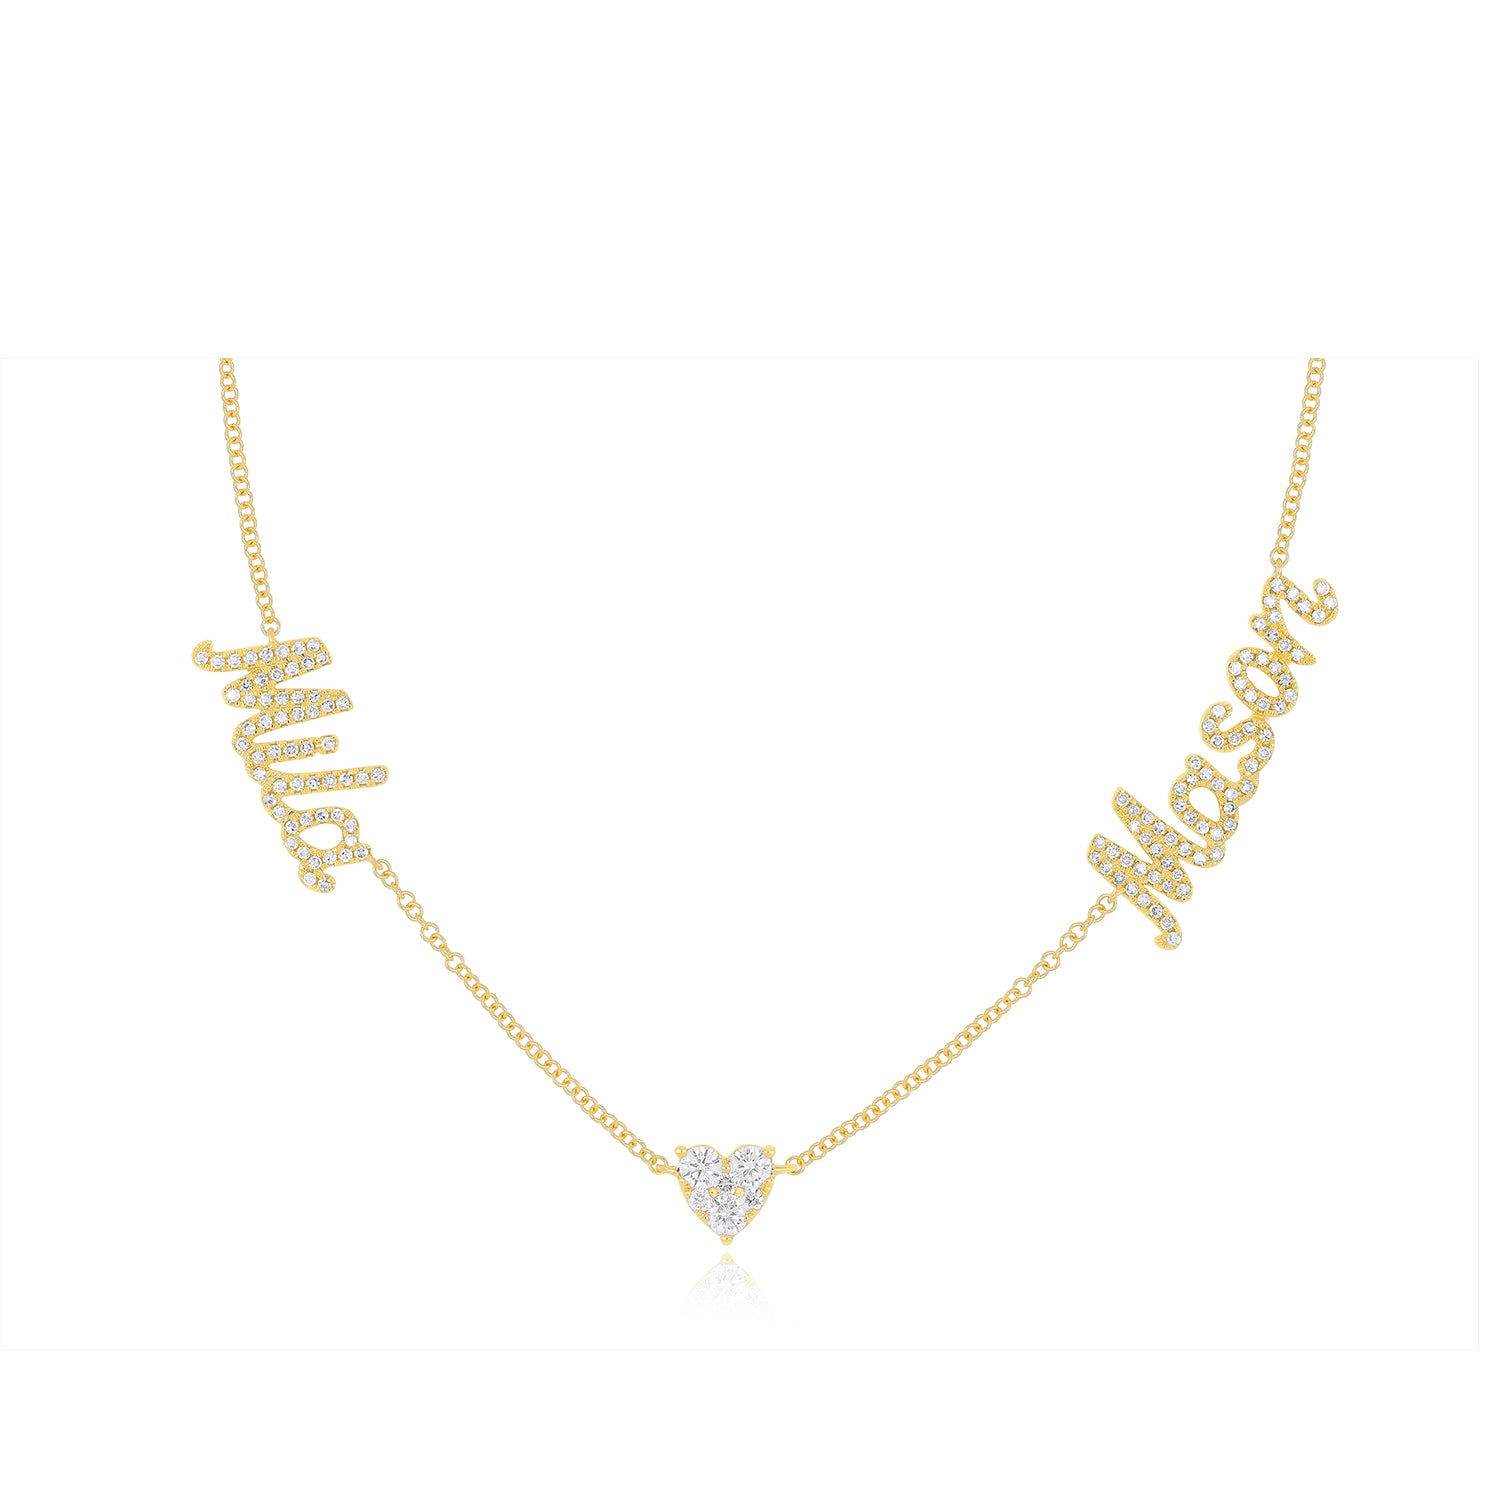 Full Cut Heart Double Diamond Script Name Necklace with names Mila and Mason with heart in the middle of necklace in 14k yellow gold